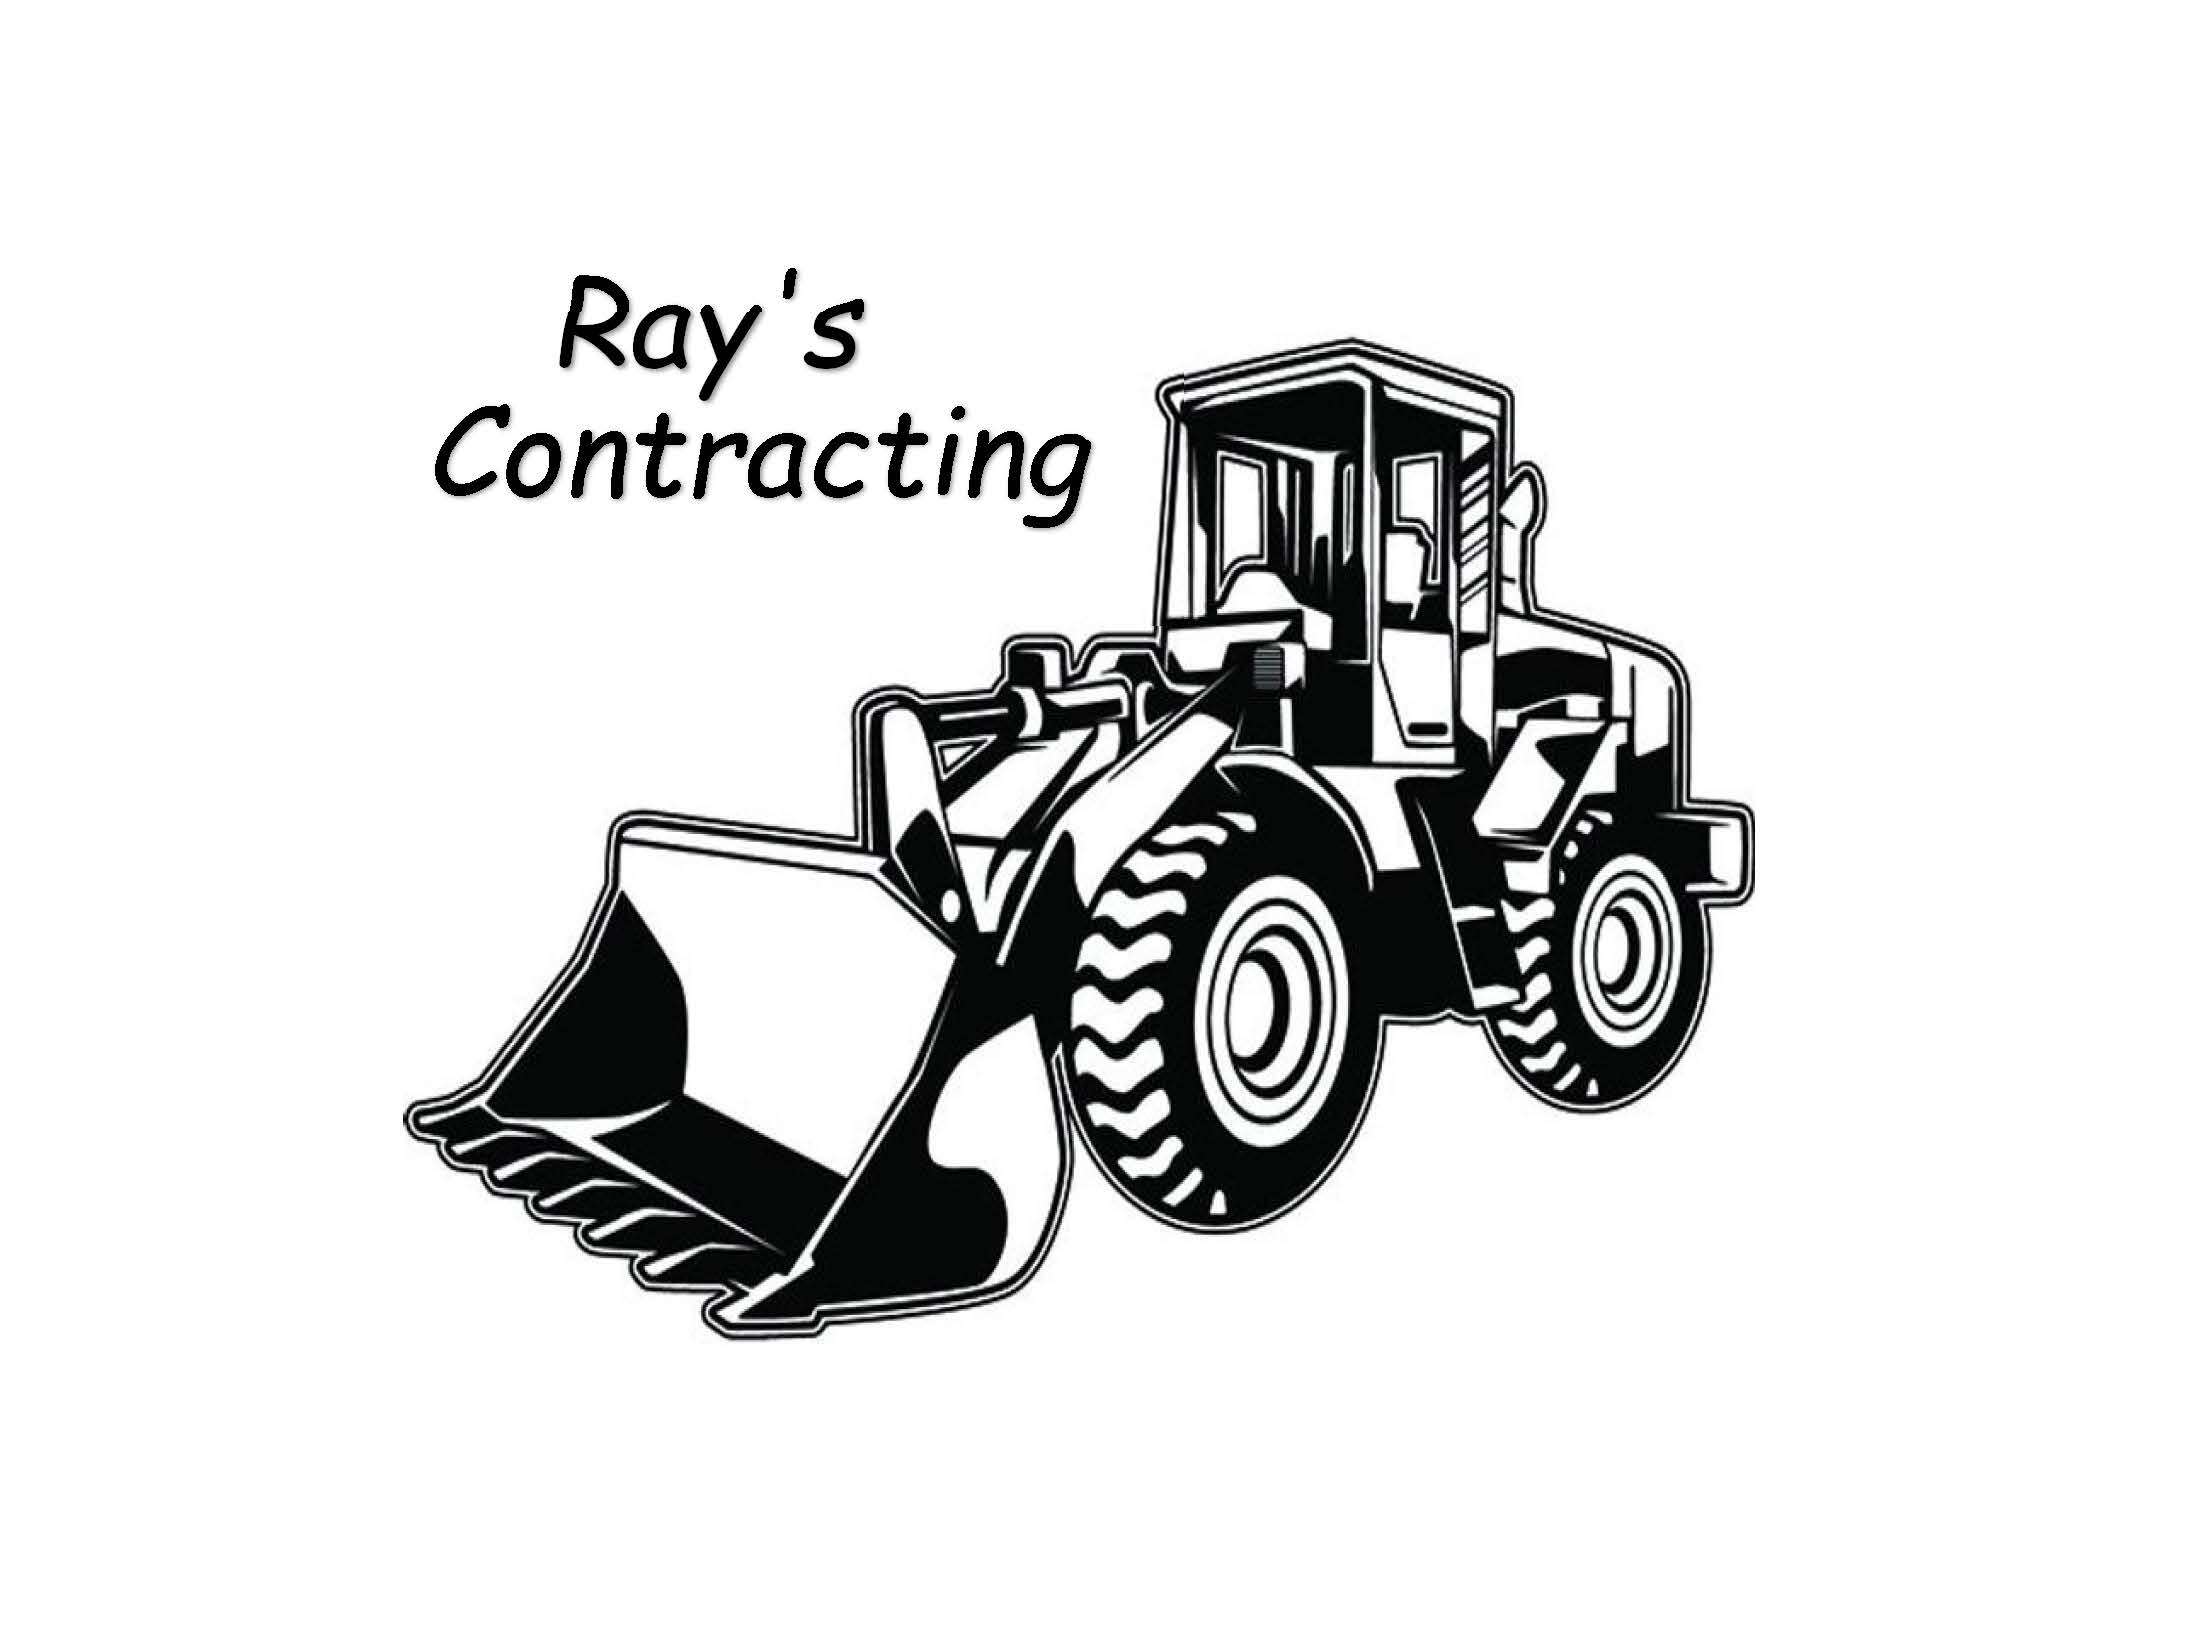 RAY'S CONTRACTING